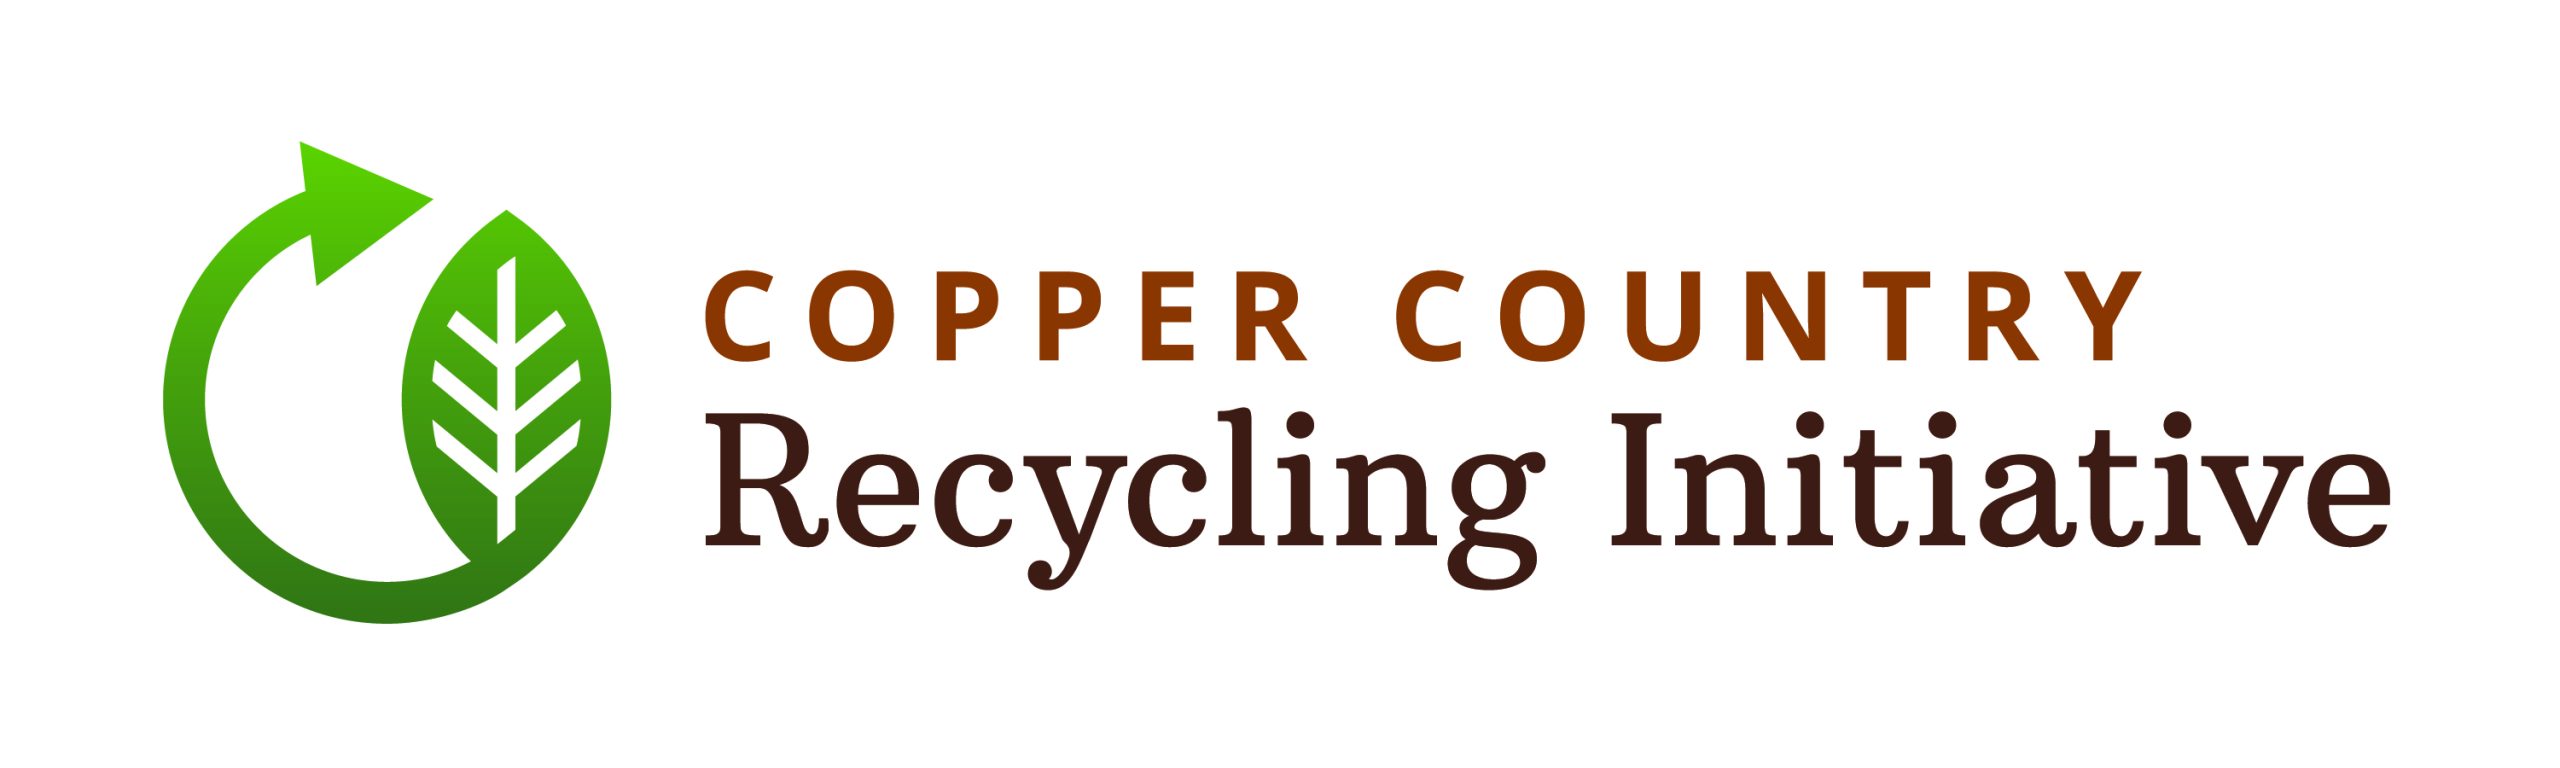 Copper Country Recycling Initiative